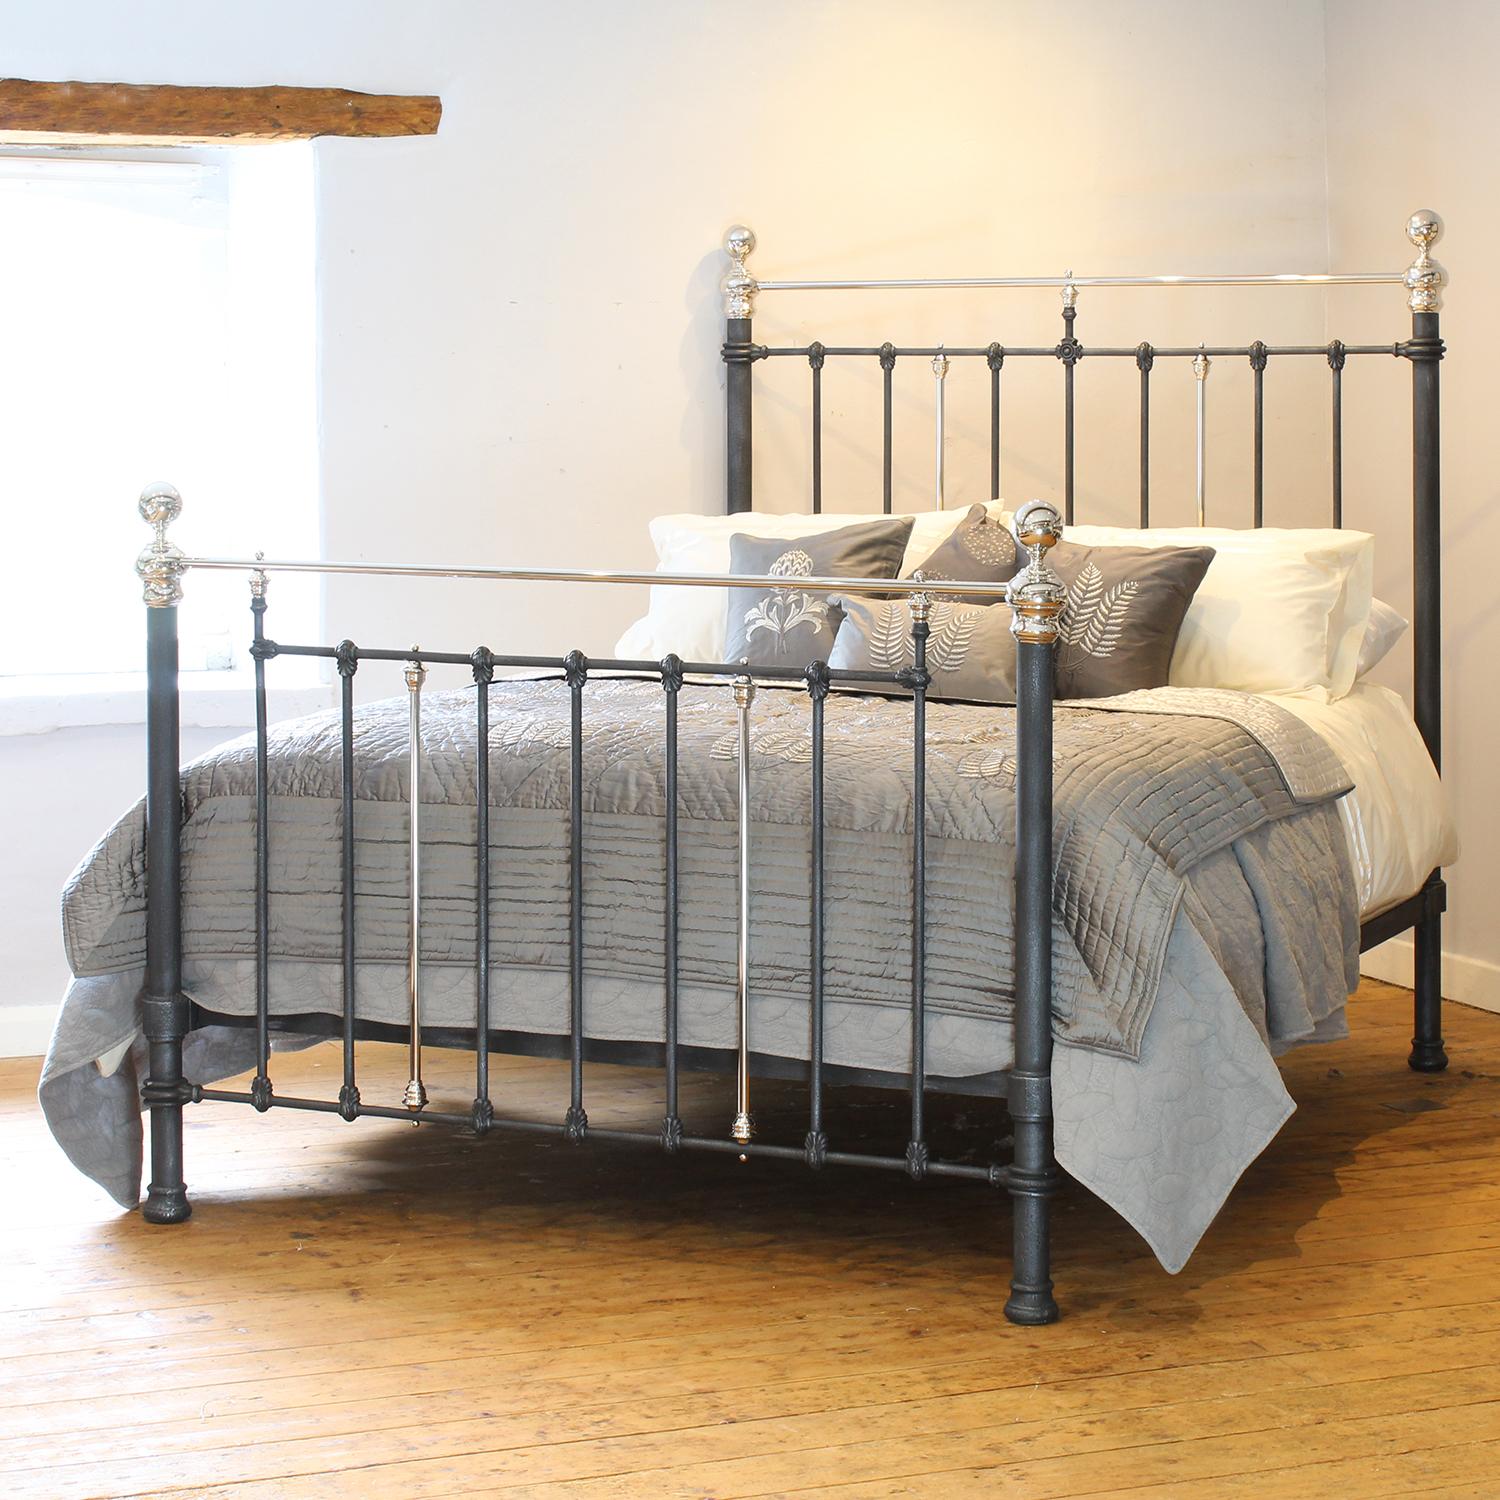 A handsome cast iron Victorian antique bed finished in charcoal with nickel plated rails, knobs and collars, and decorative castings.

This bed accepts a UK king size or US queen size (5ft, 60in or 150cm wide) base and mattress set.

The price